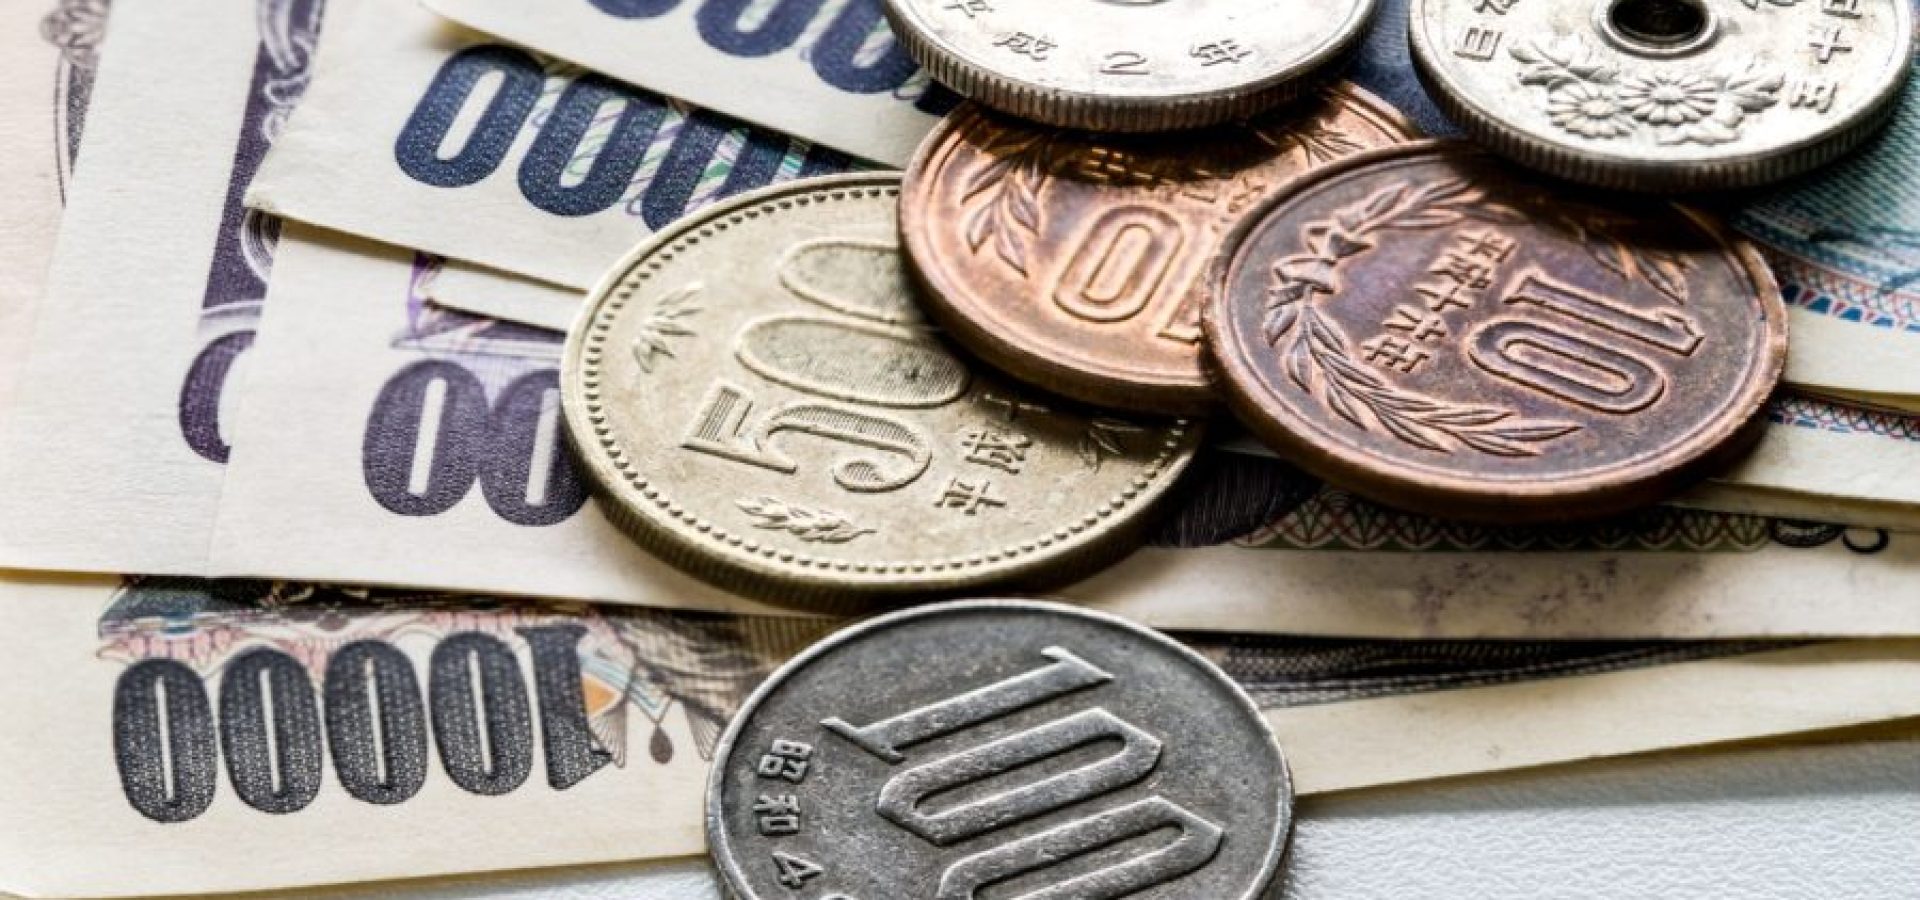 The Japanese Yen, U.S. dollar and other currencies